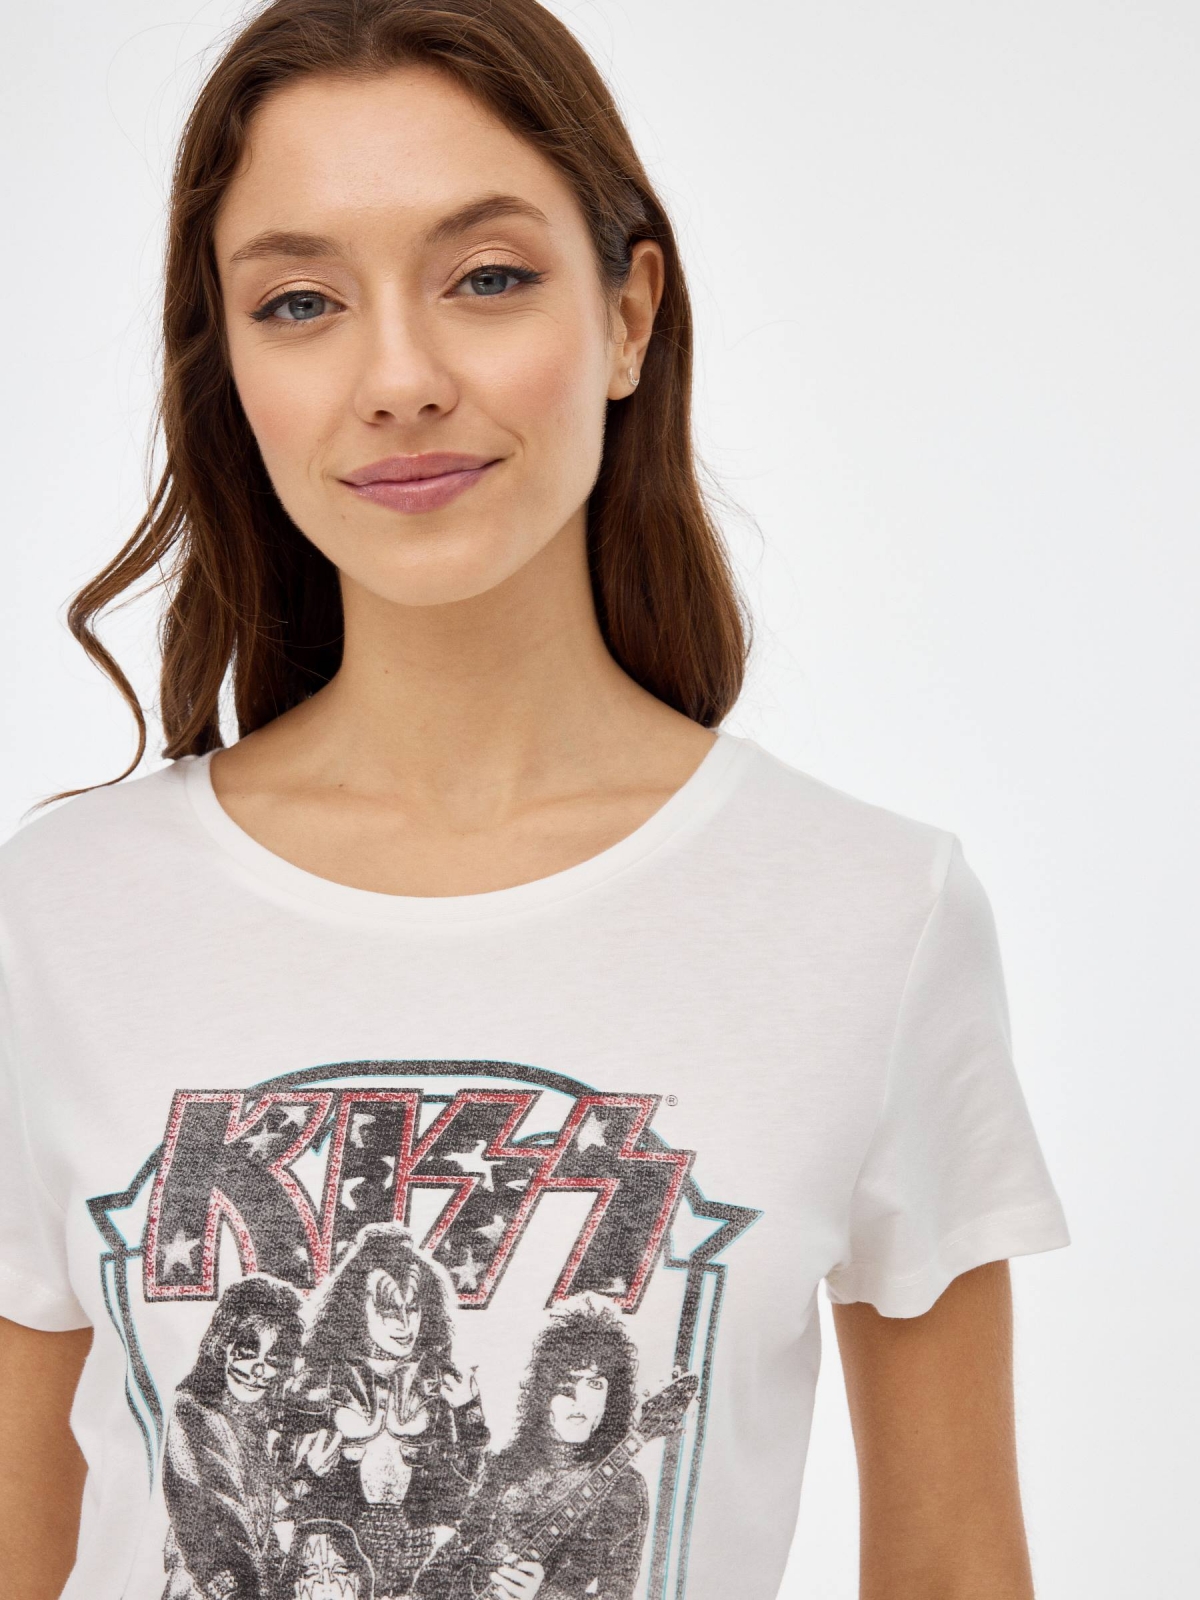  KISS t-shirt off white foreground